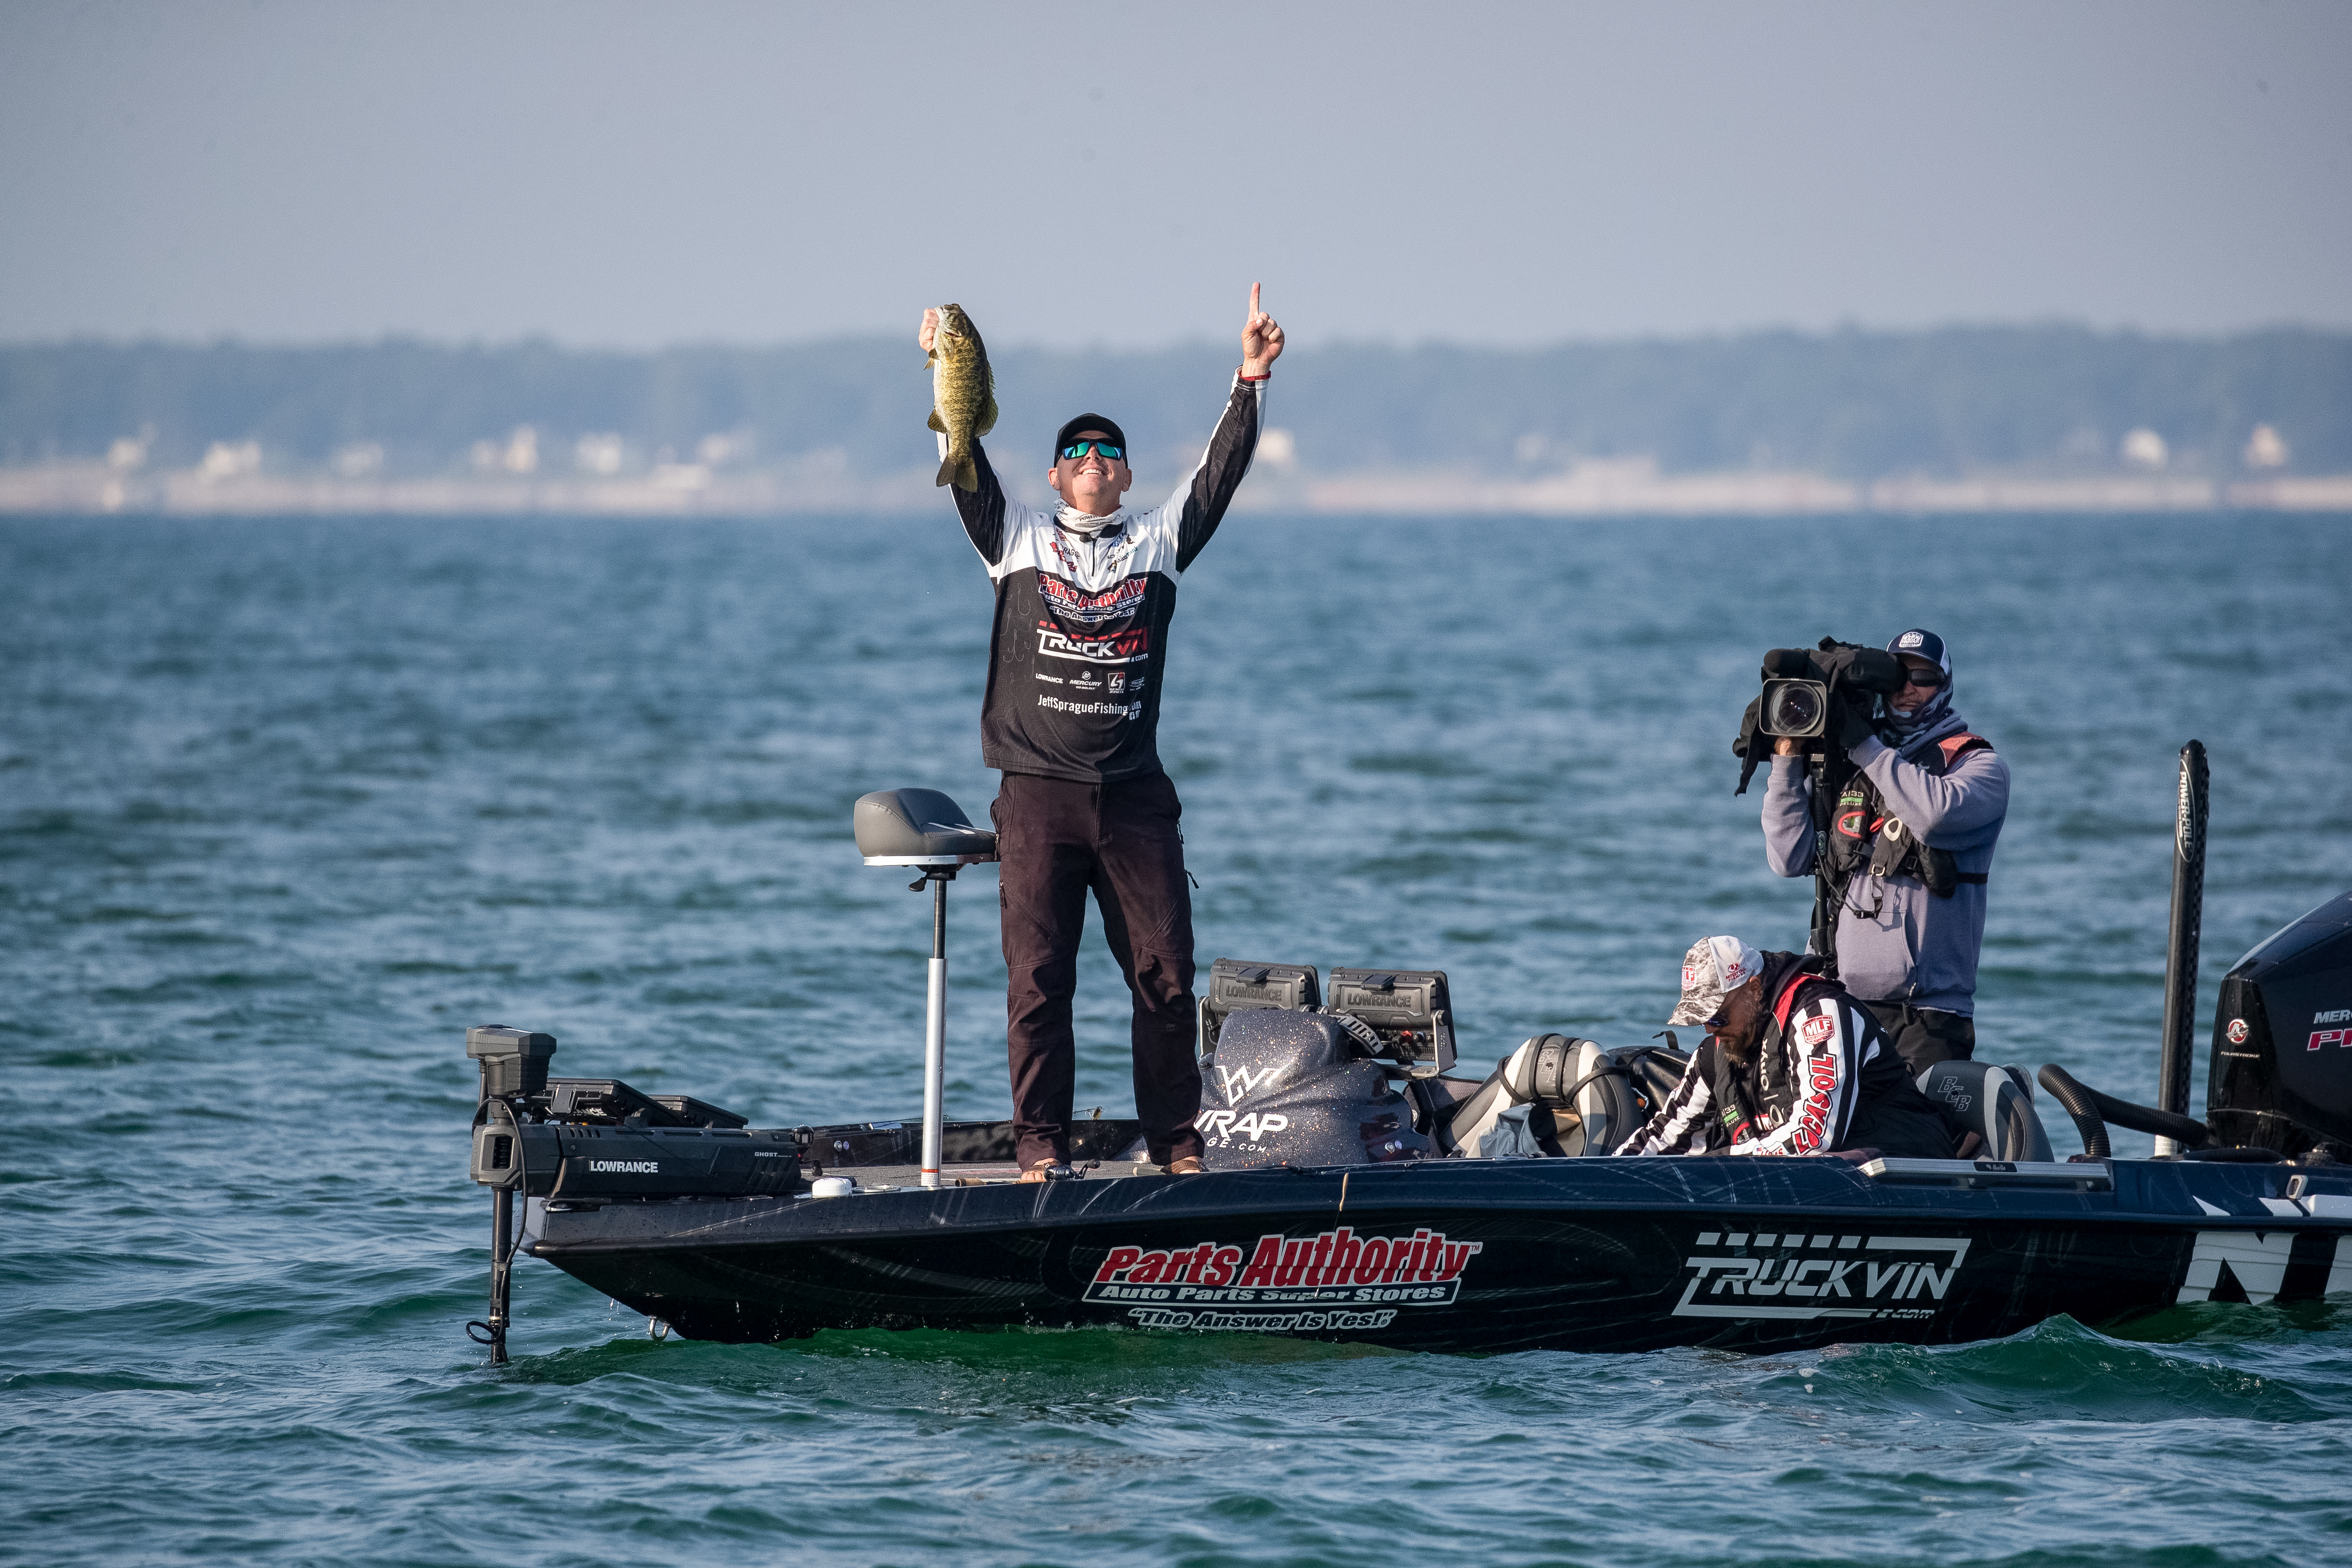 Sprague wins Group B Qualifying Round at Minn Kota Stage Seven at Saginaw  Bay Presented by Suzuki via tiebreaker over Myers - Major League Fishing